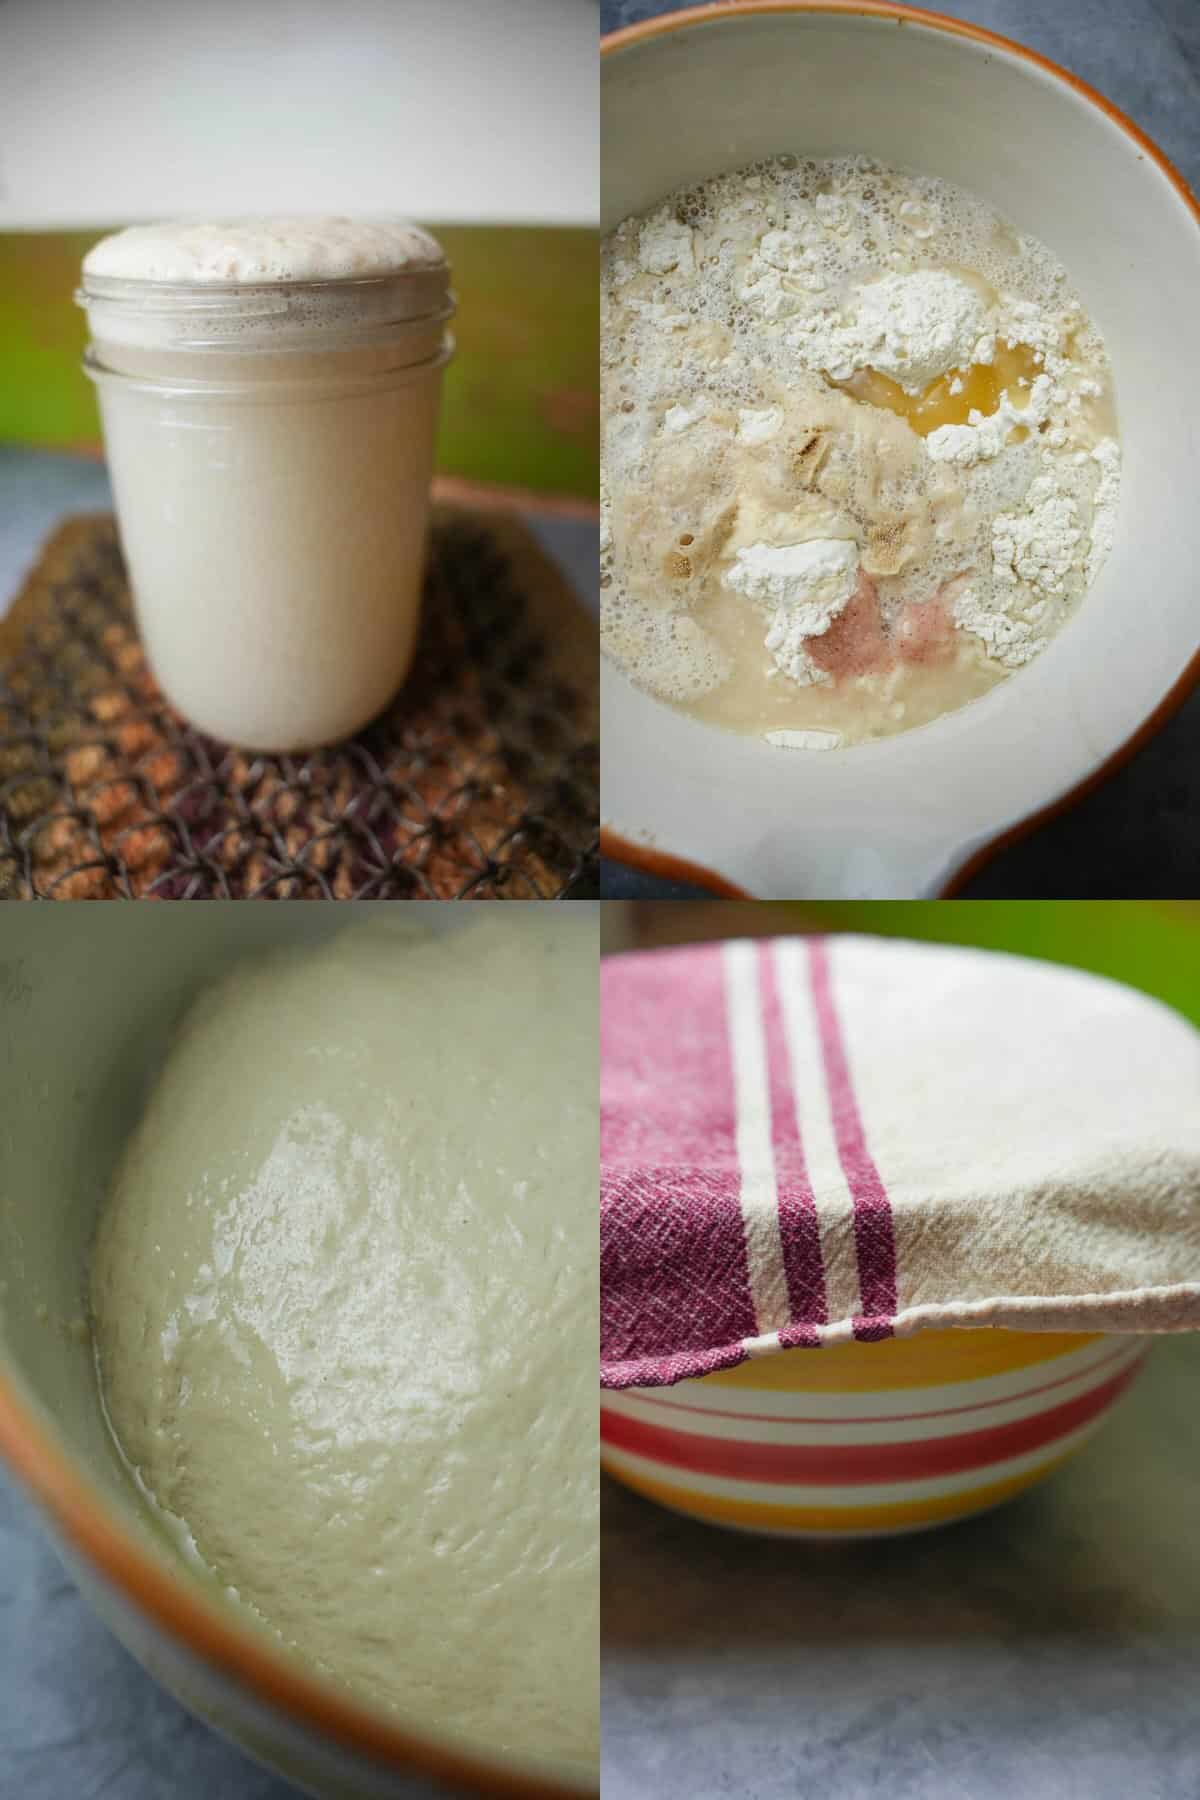 A set of four photos showing the proofing of yeast and forming of dough for kulcha bread making.